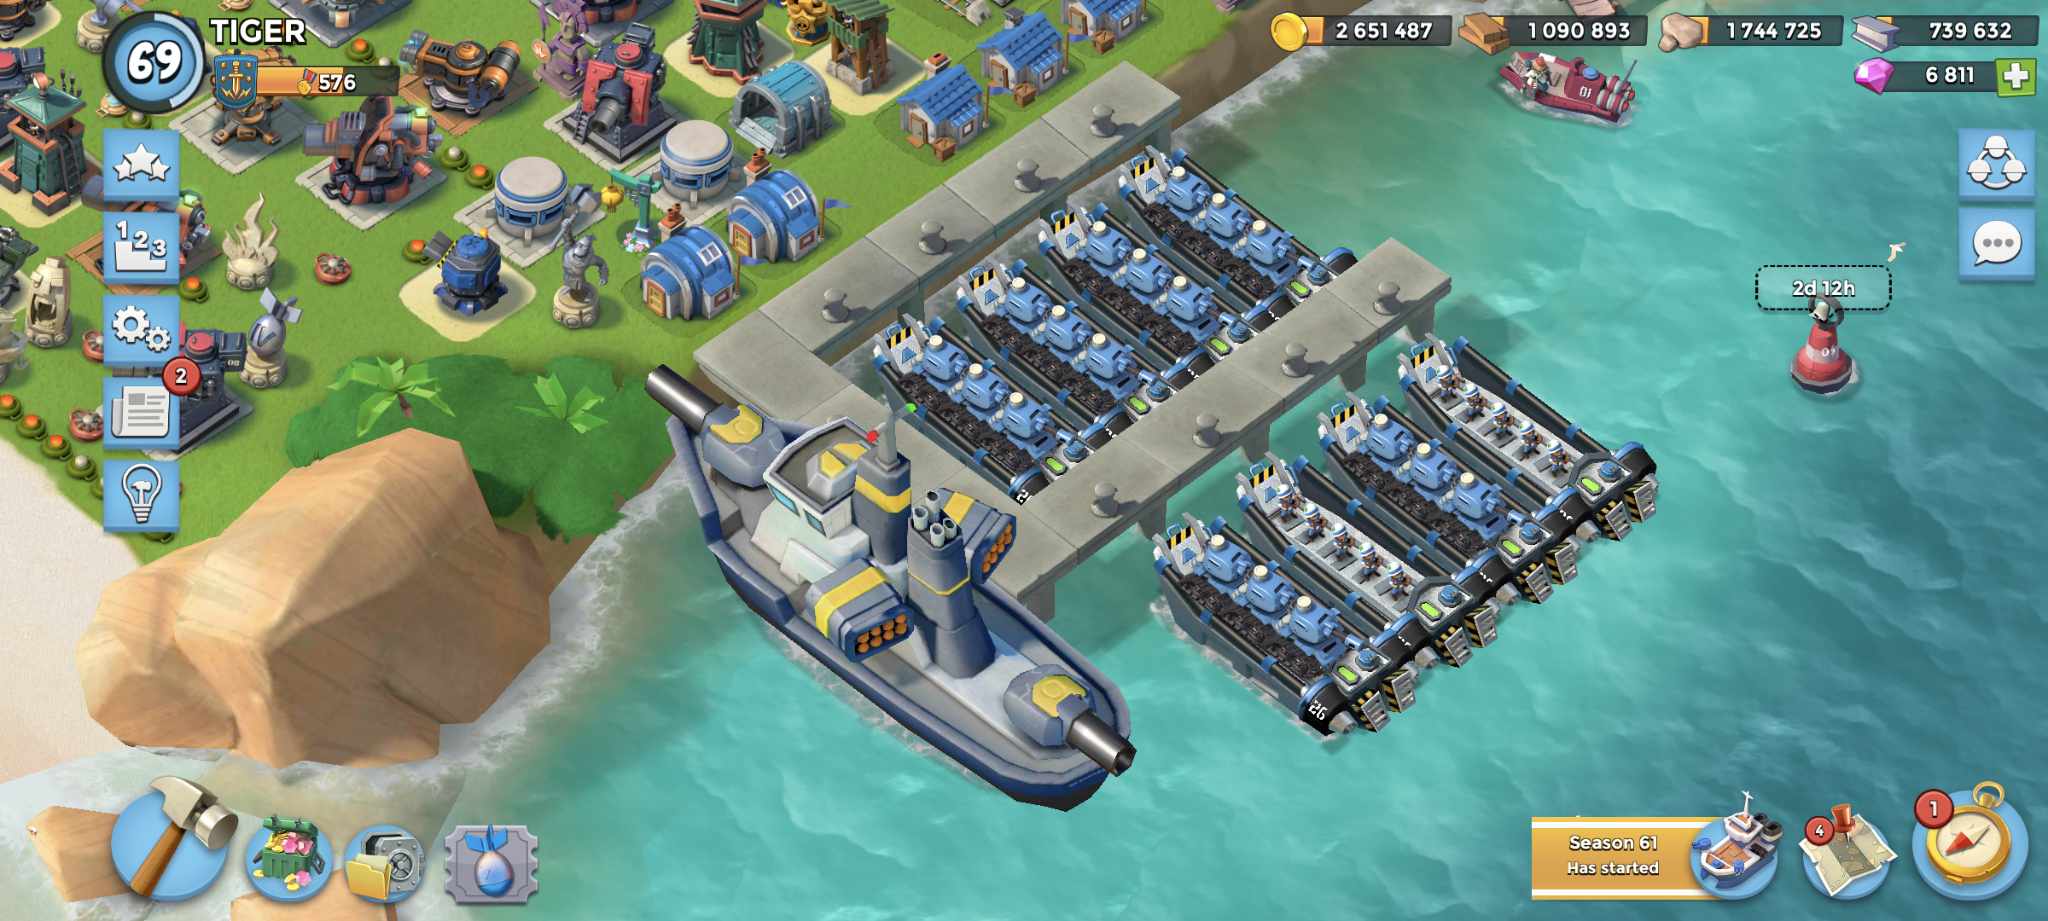 LEVEL 69 - HQ 26 - VP 567 - PW 1923 - GEMS 6861 - GUNBOAT- 24 - Very Cheap and Safe - Instant Delivery .